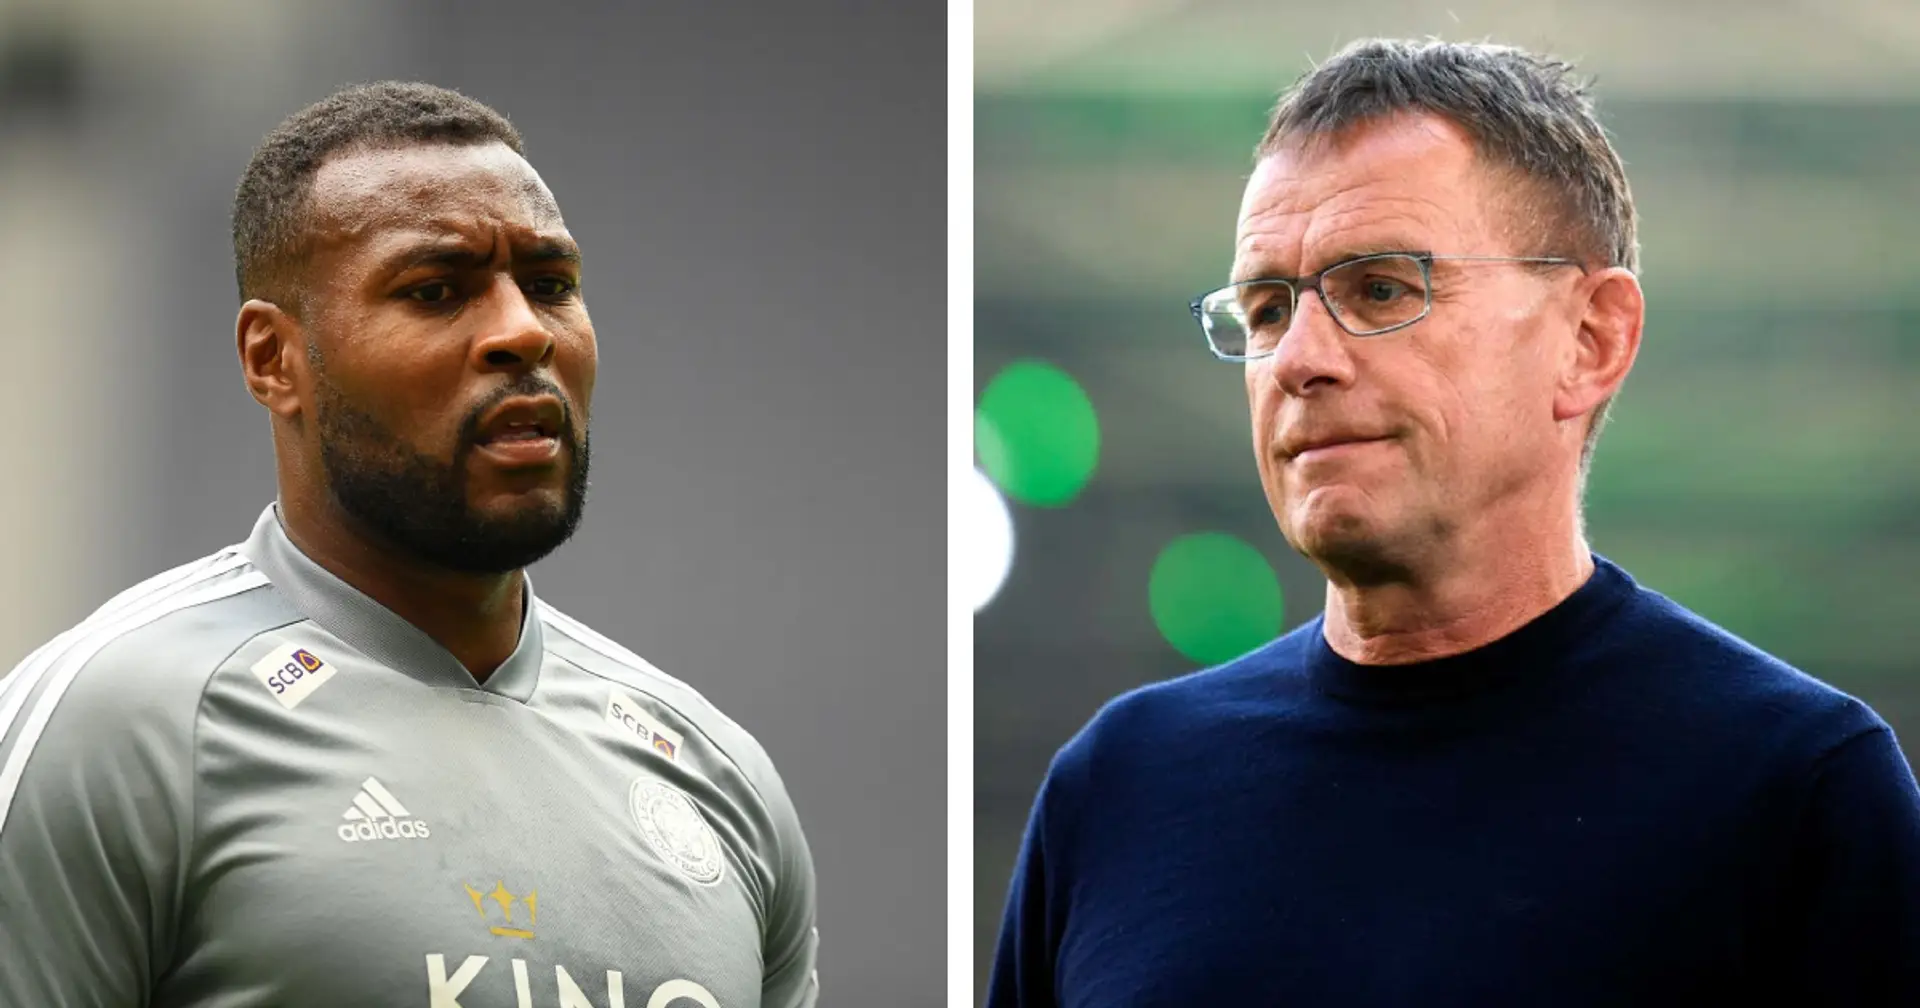 'They've got the depth': Ex-Leicester captain Wes Morgan backs Man United to secure top-4 finish under Rangnick